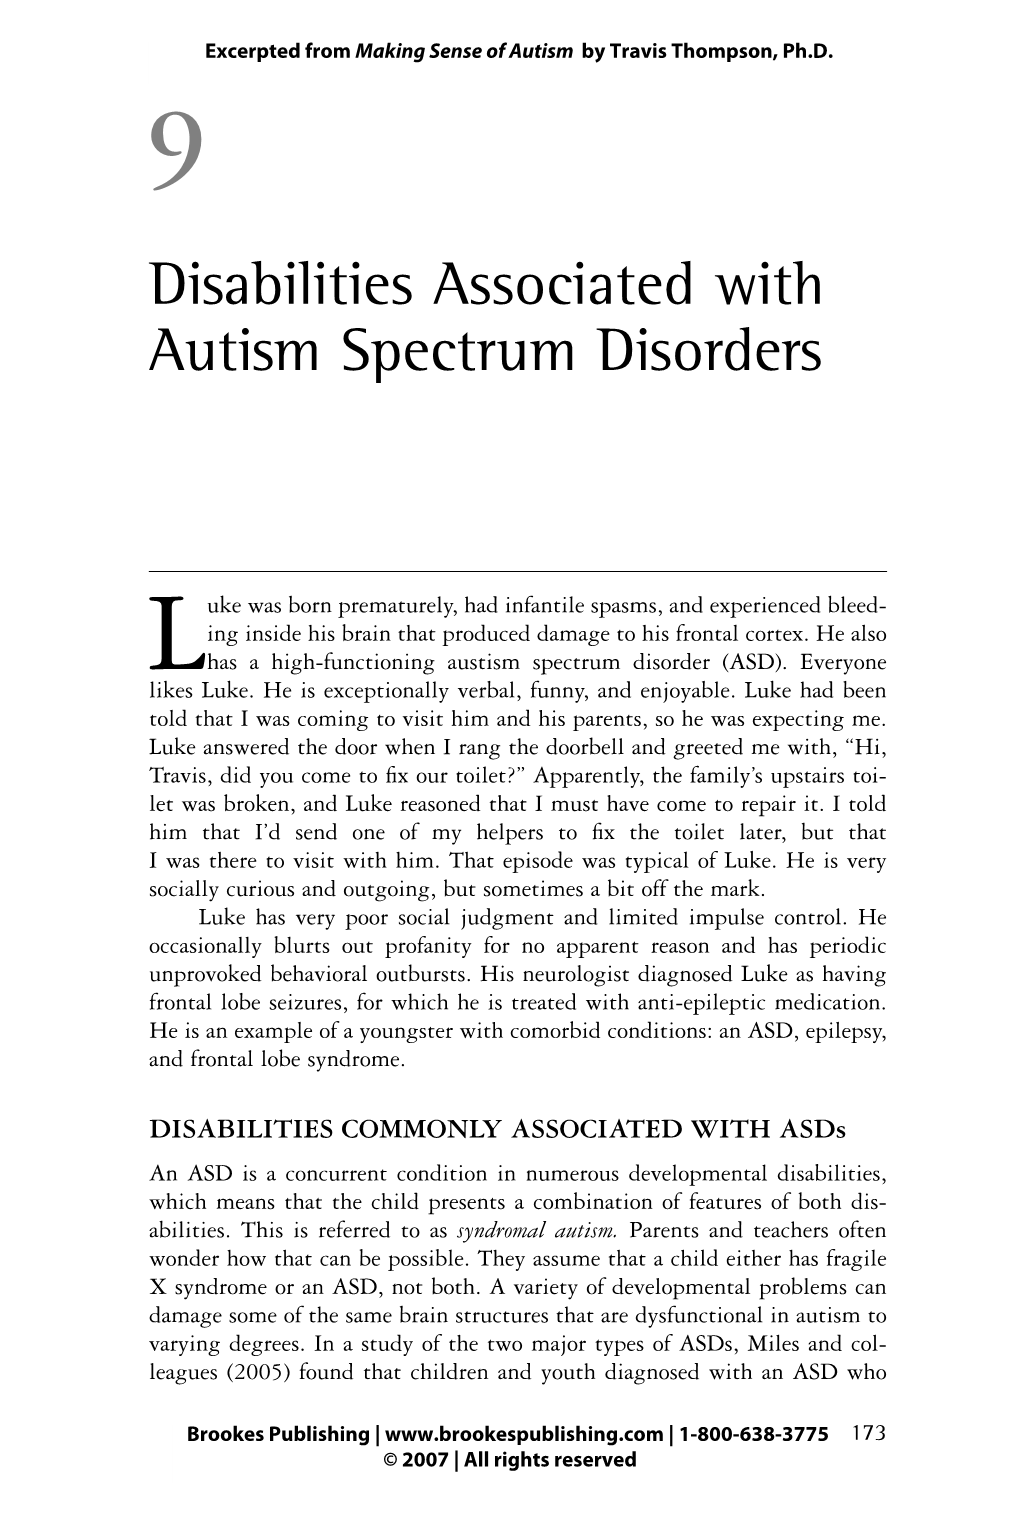 Disabilities Associated with Autism Spectrum Disorders